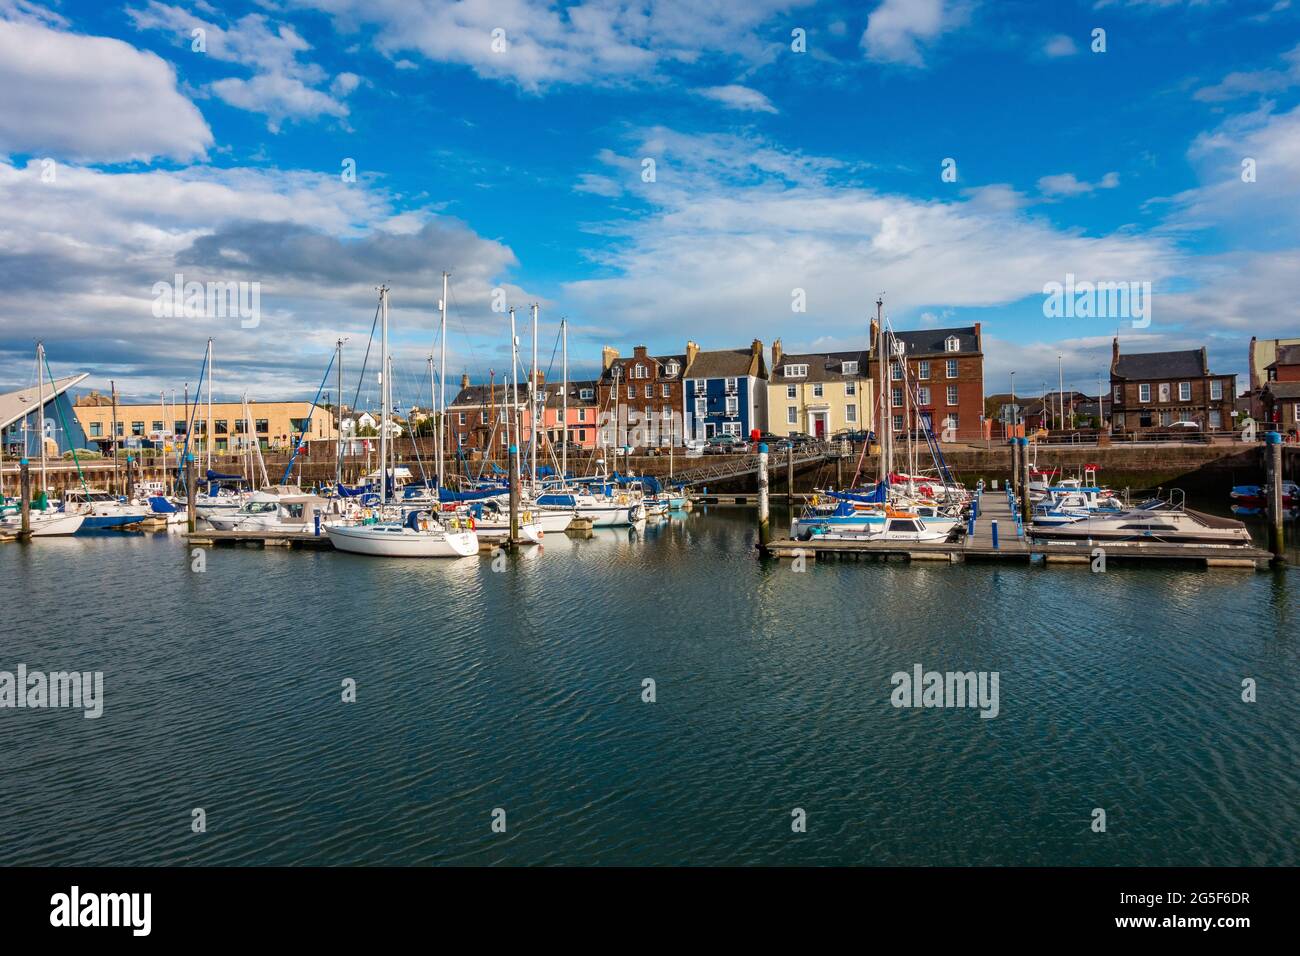 The pretty fishing harbour in the town of Arbroath, Angus, Scotland Stock Photo